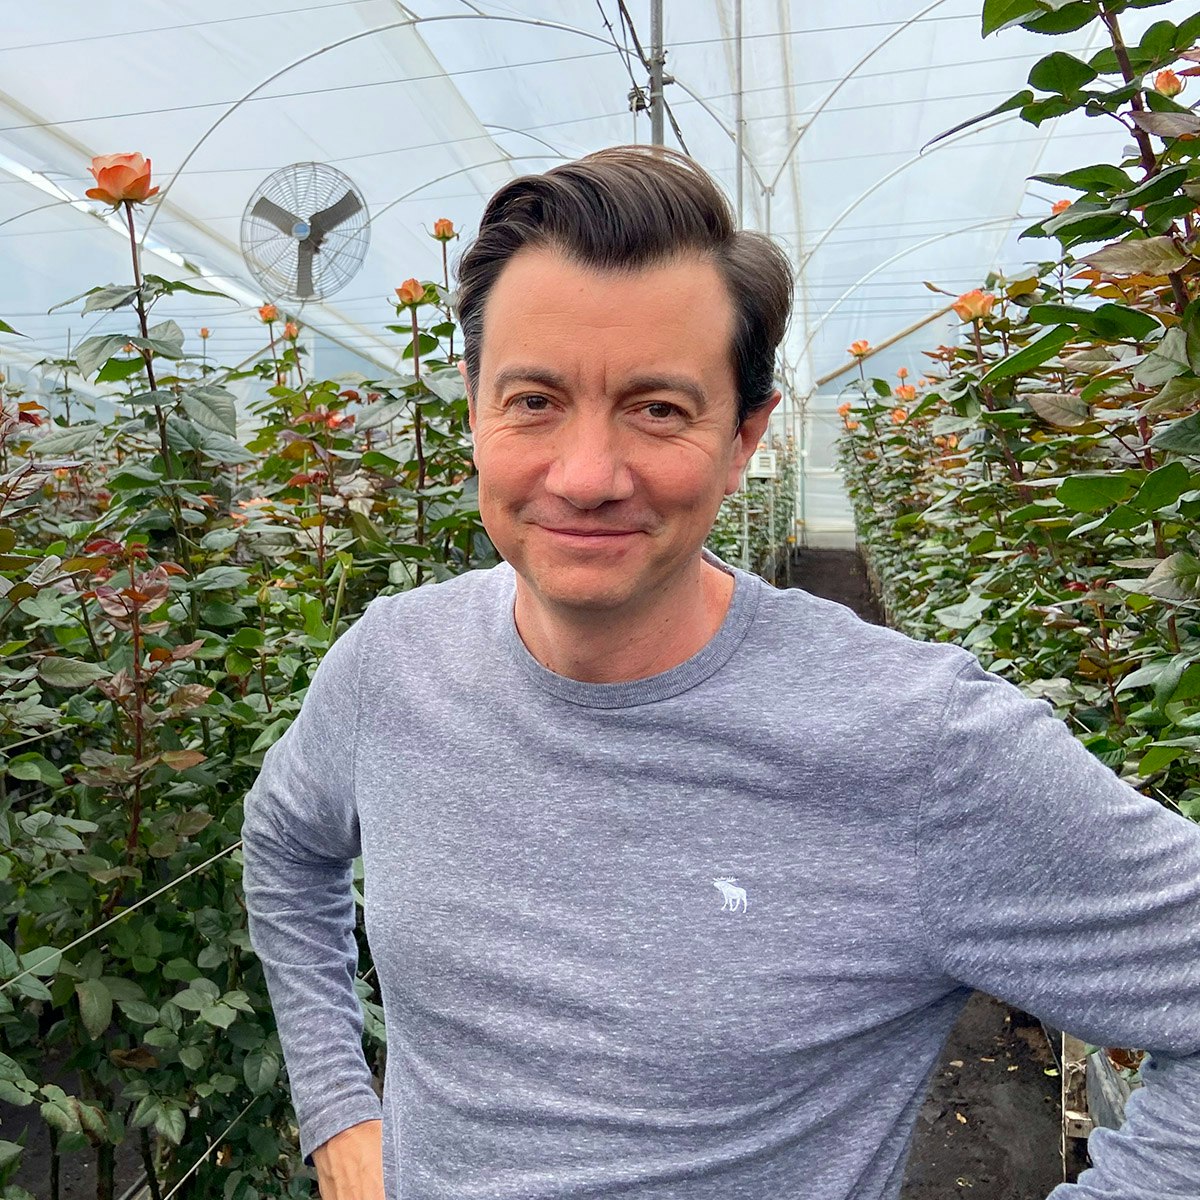 Smiling man with dark hair wearing a gray long-sleeved shirt in a greenhouse with rows of rose bushes and a large fan in the background.